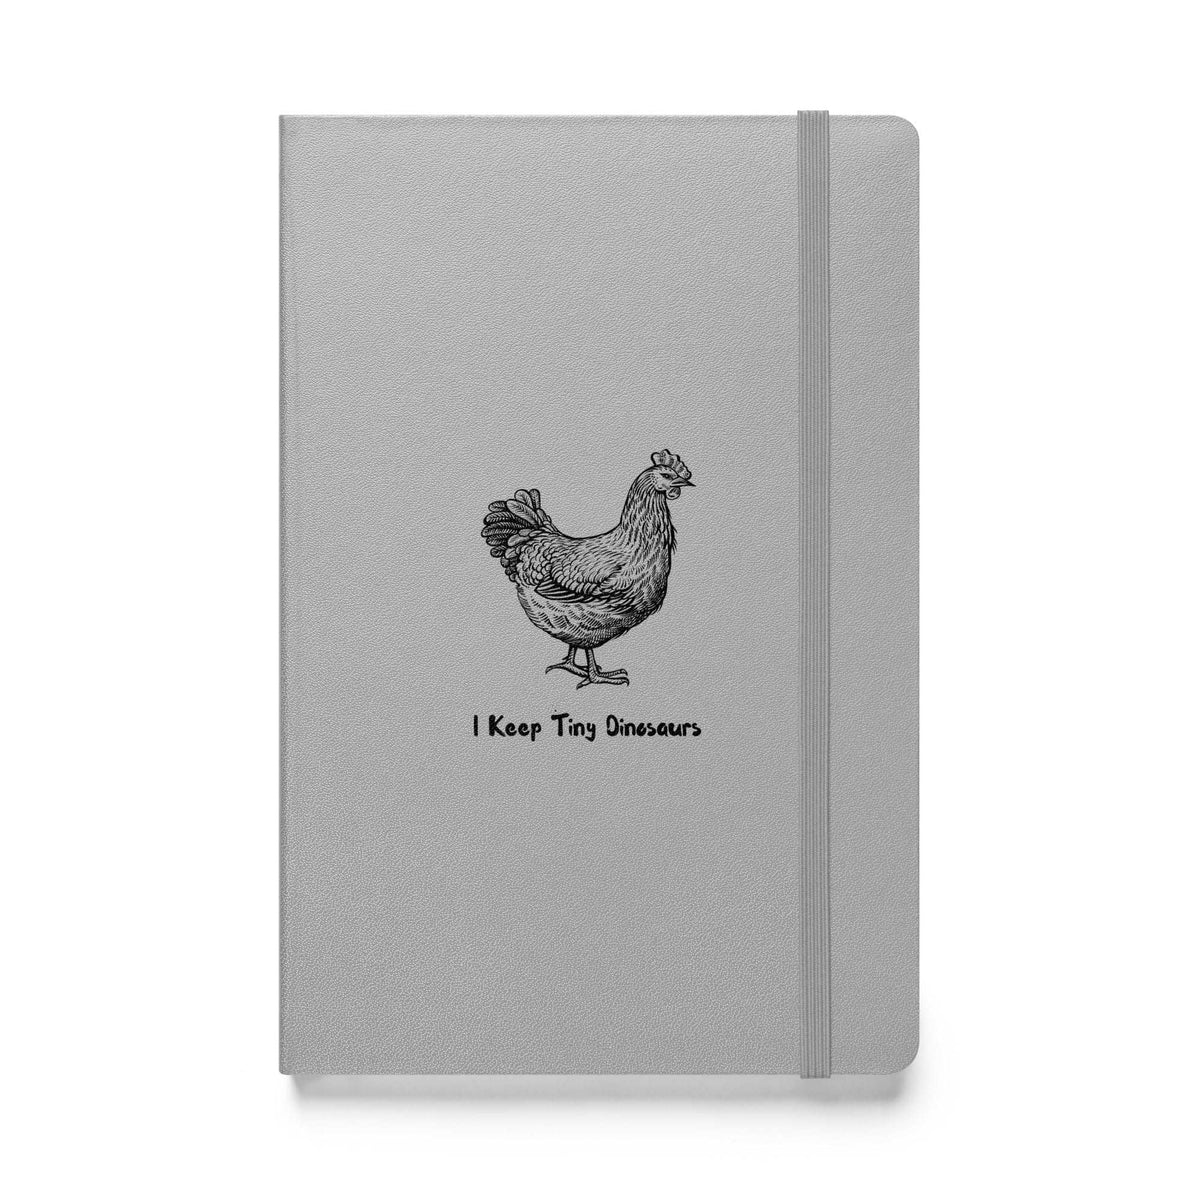 Chicken Tiny Dinosaurs Hardcover Bound Notebook - Cluck It All Farms